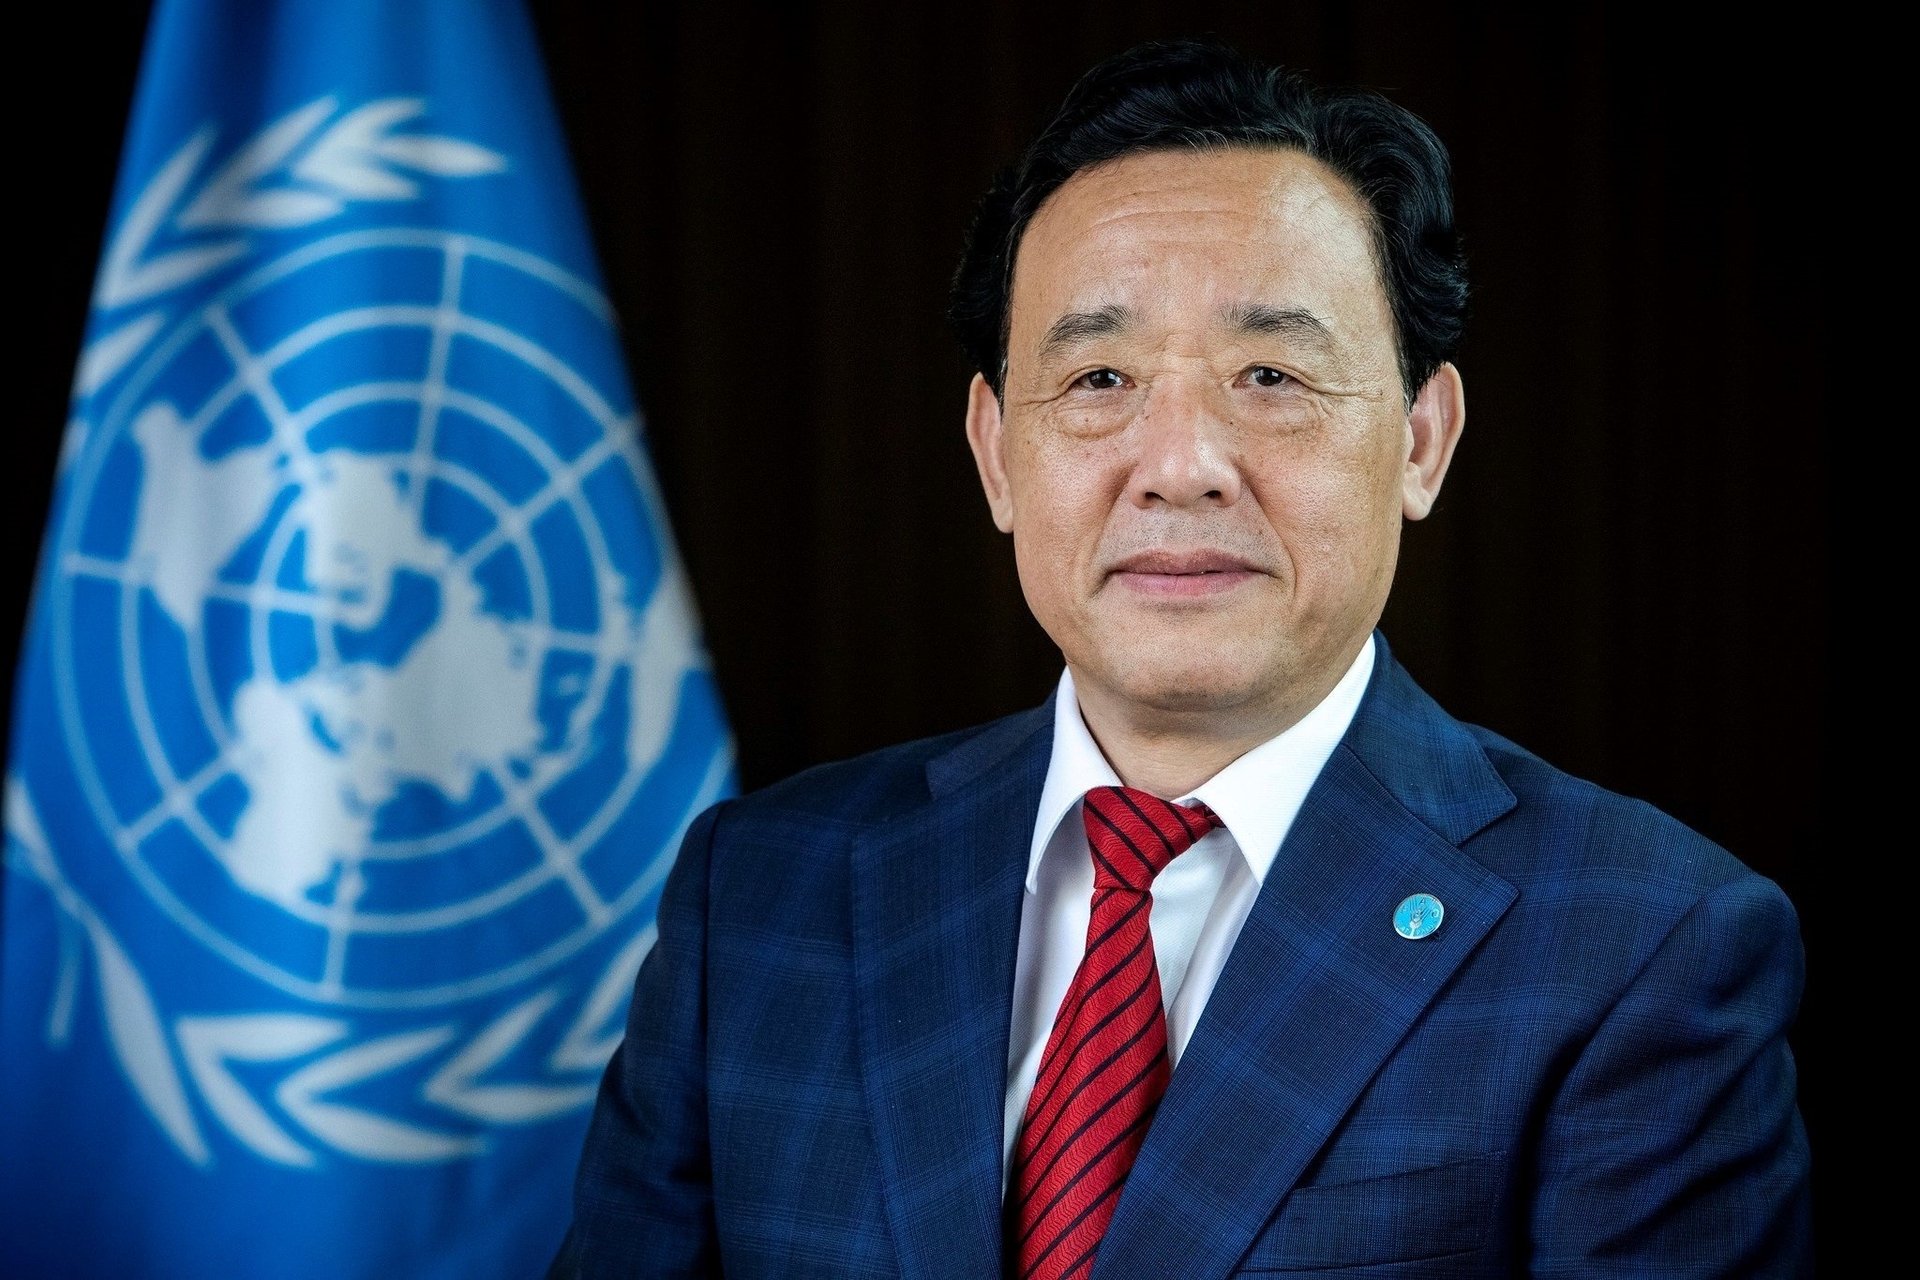 Dr. QU Dongyu, Director-General of the Food and Agriculture Organization of the United Nations (FAO).